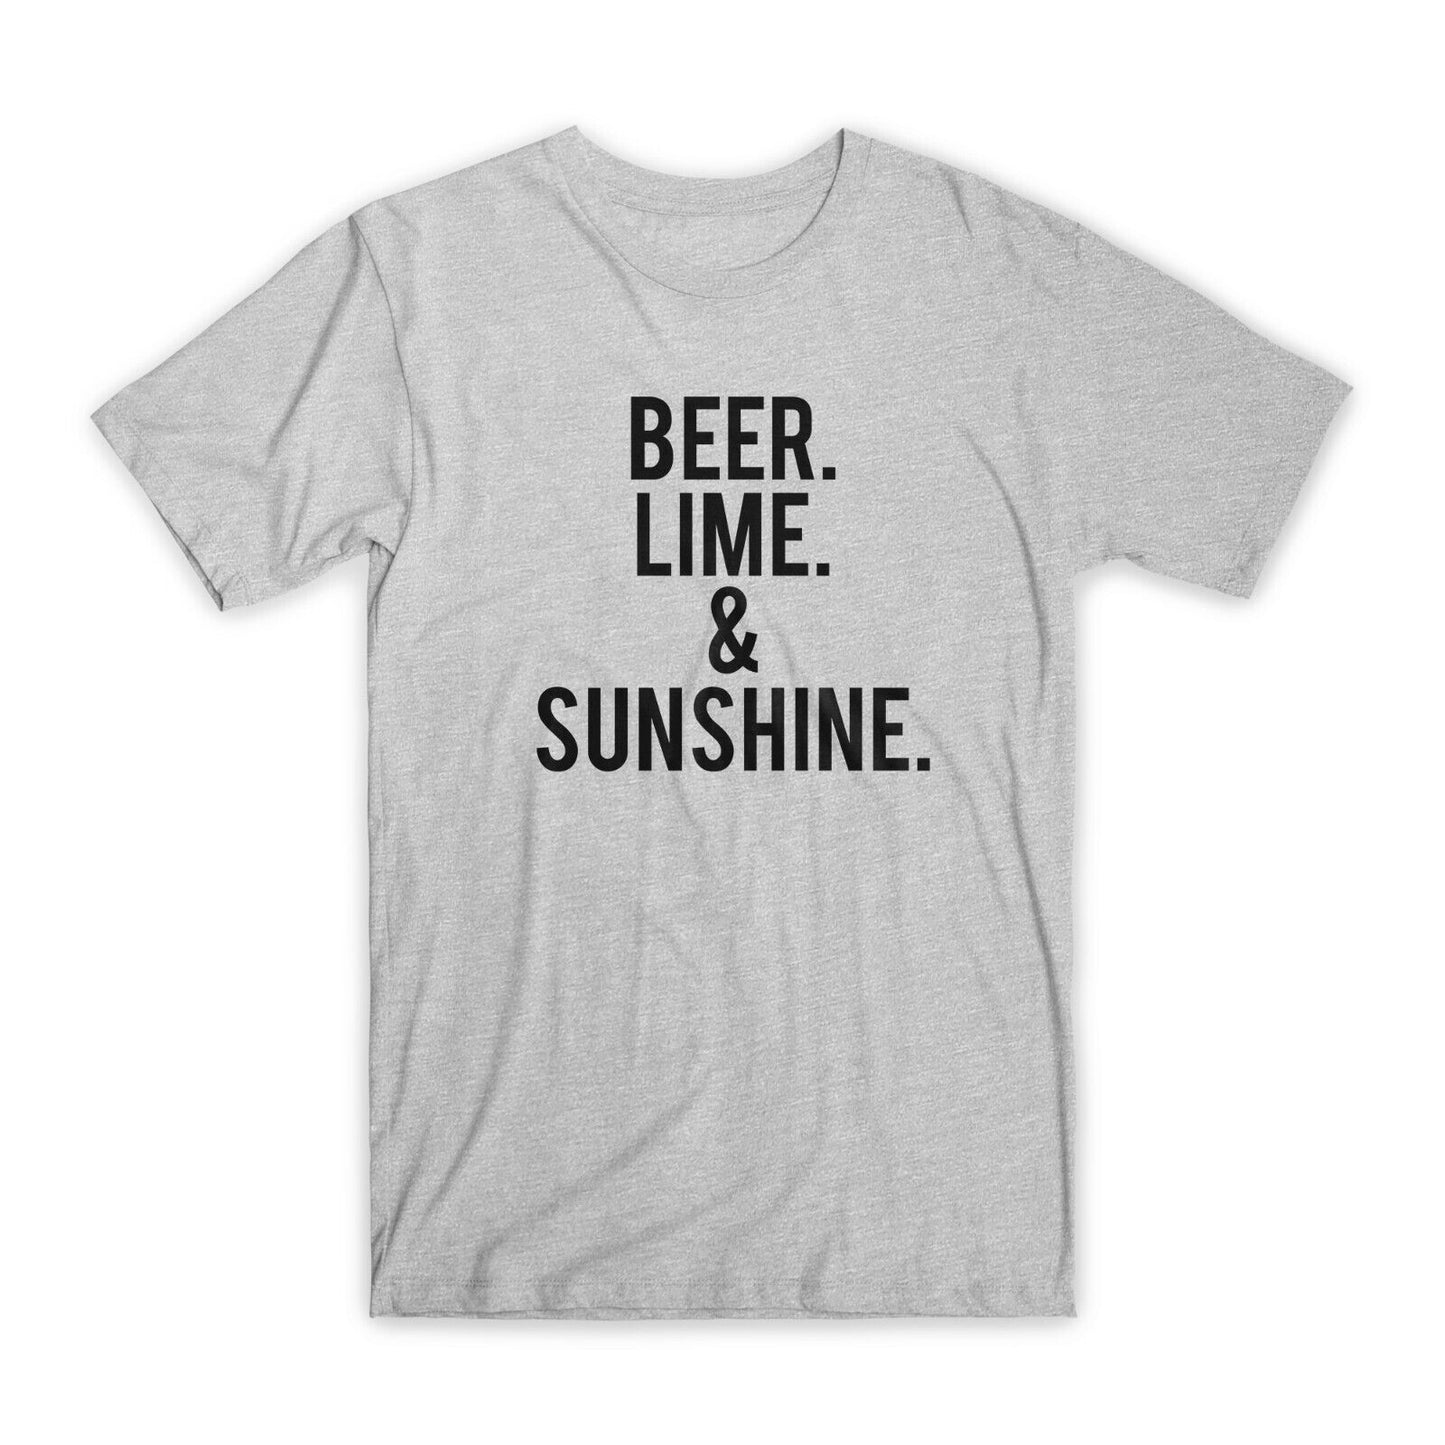 Beer Lime & Shunshine T-Shirt Premium Soft Cotton Funny Tees Novelty Gift NEW